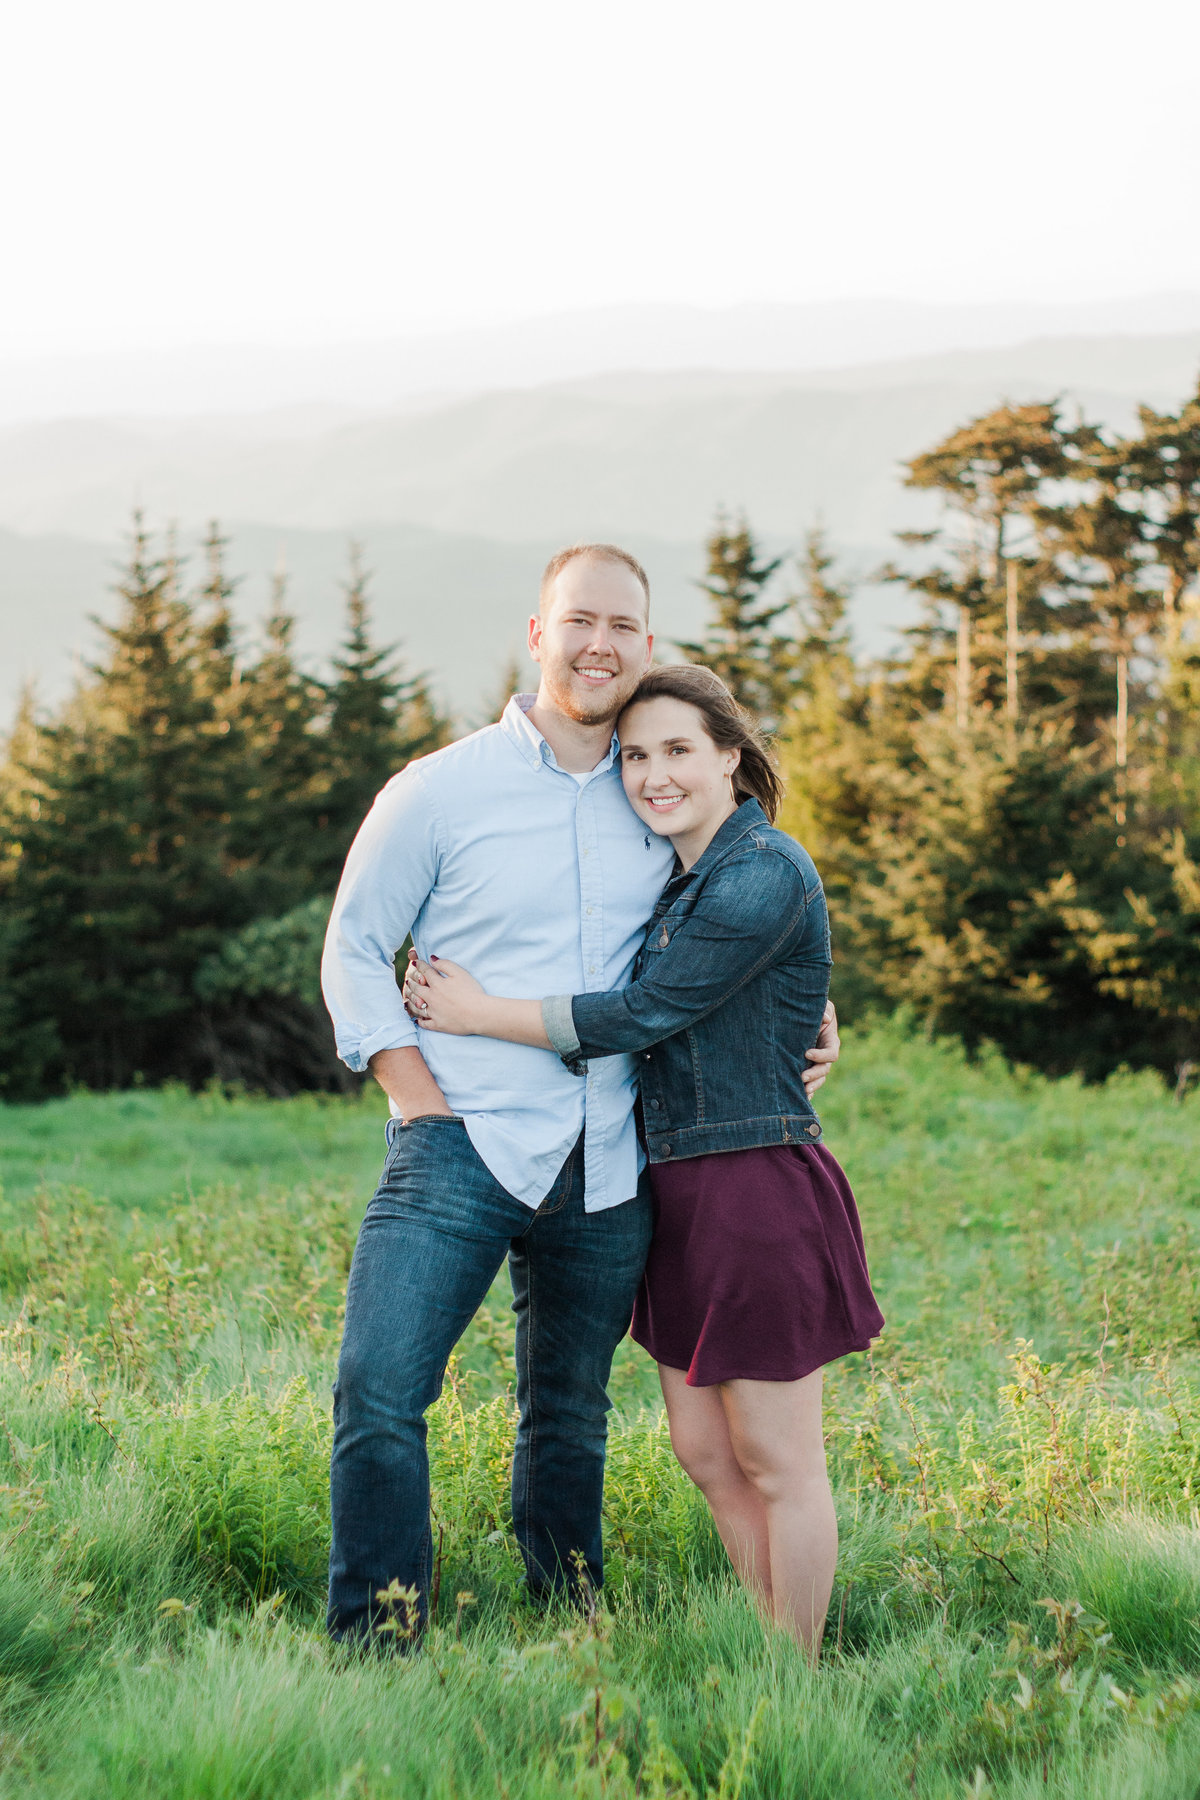 Adventurous engagement photographed at Roan Mountain by Boone Photographer Wayfaring Wanderer.